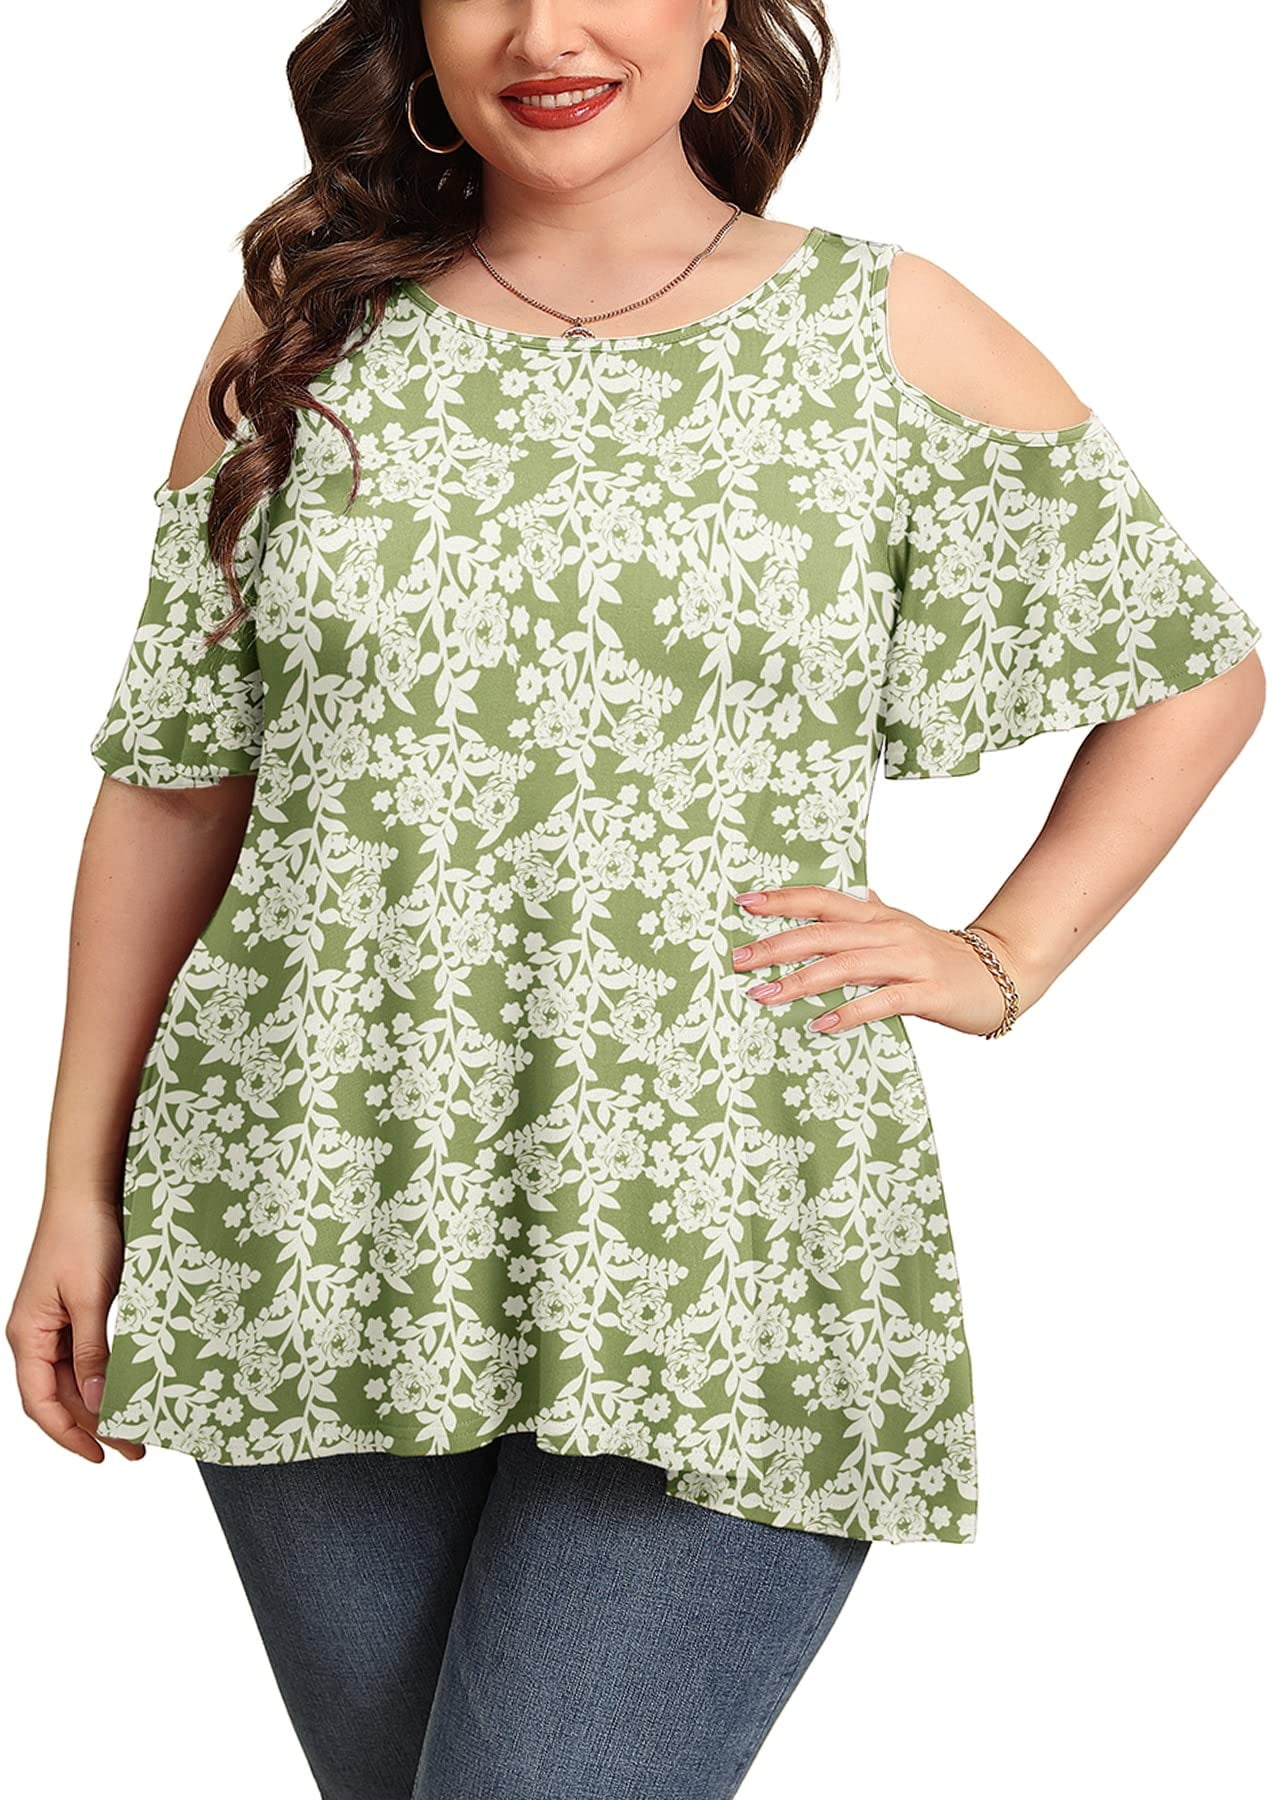 SHOWMALL Plus Size Tunic for Women Short Sleeve Clothes Green Roses 3X ...